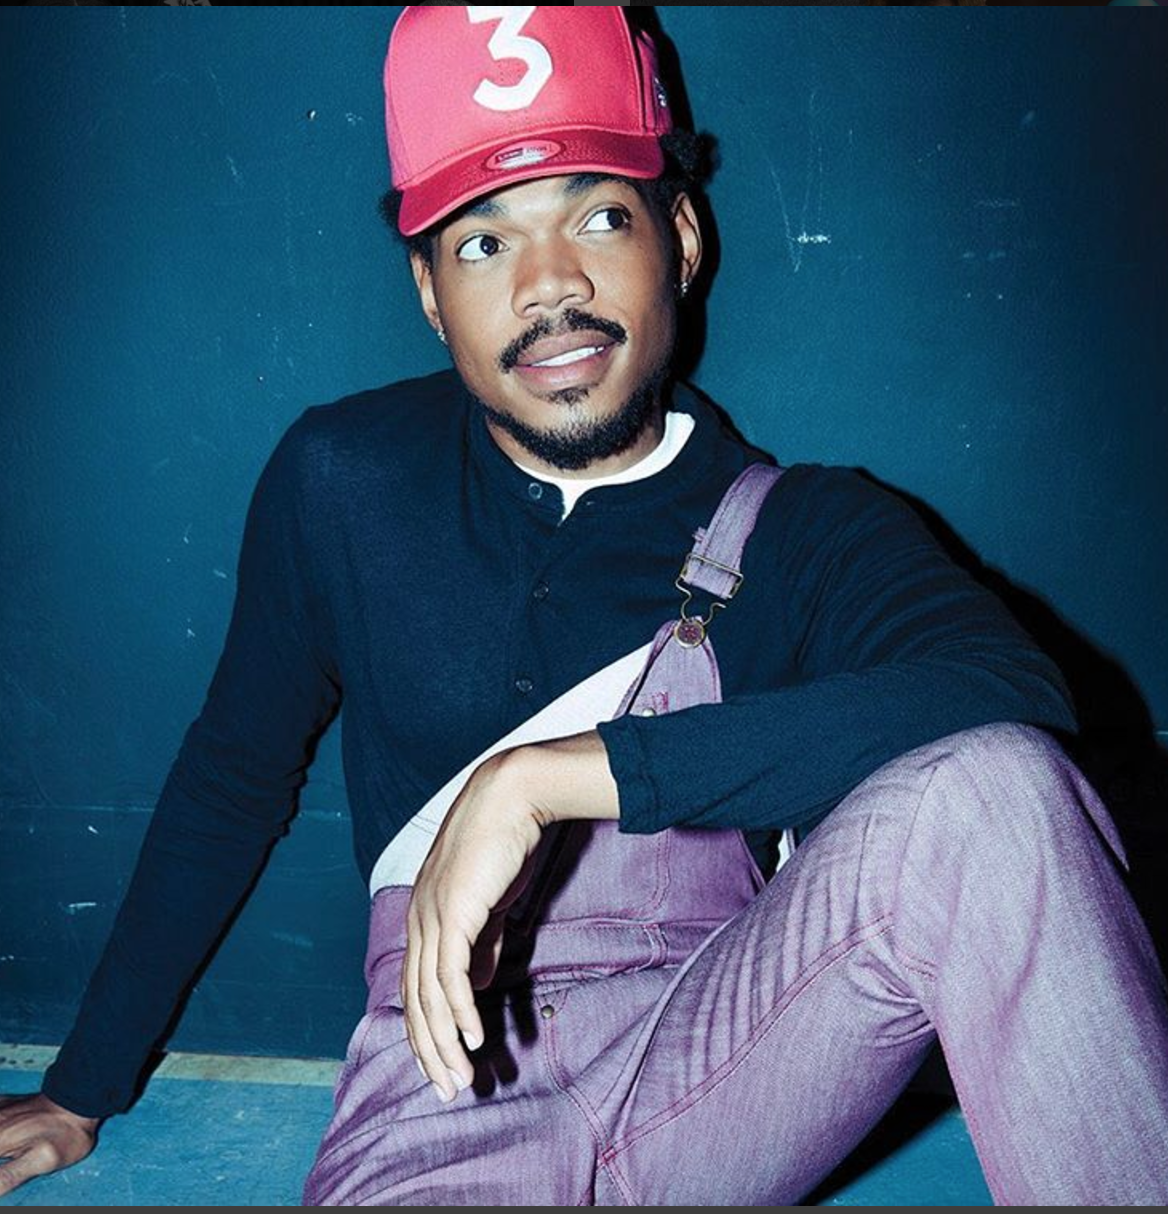 New Music: Chance The Rapper – “And They Say” Feat. Kaytranada [LISTEN]